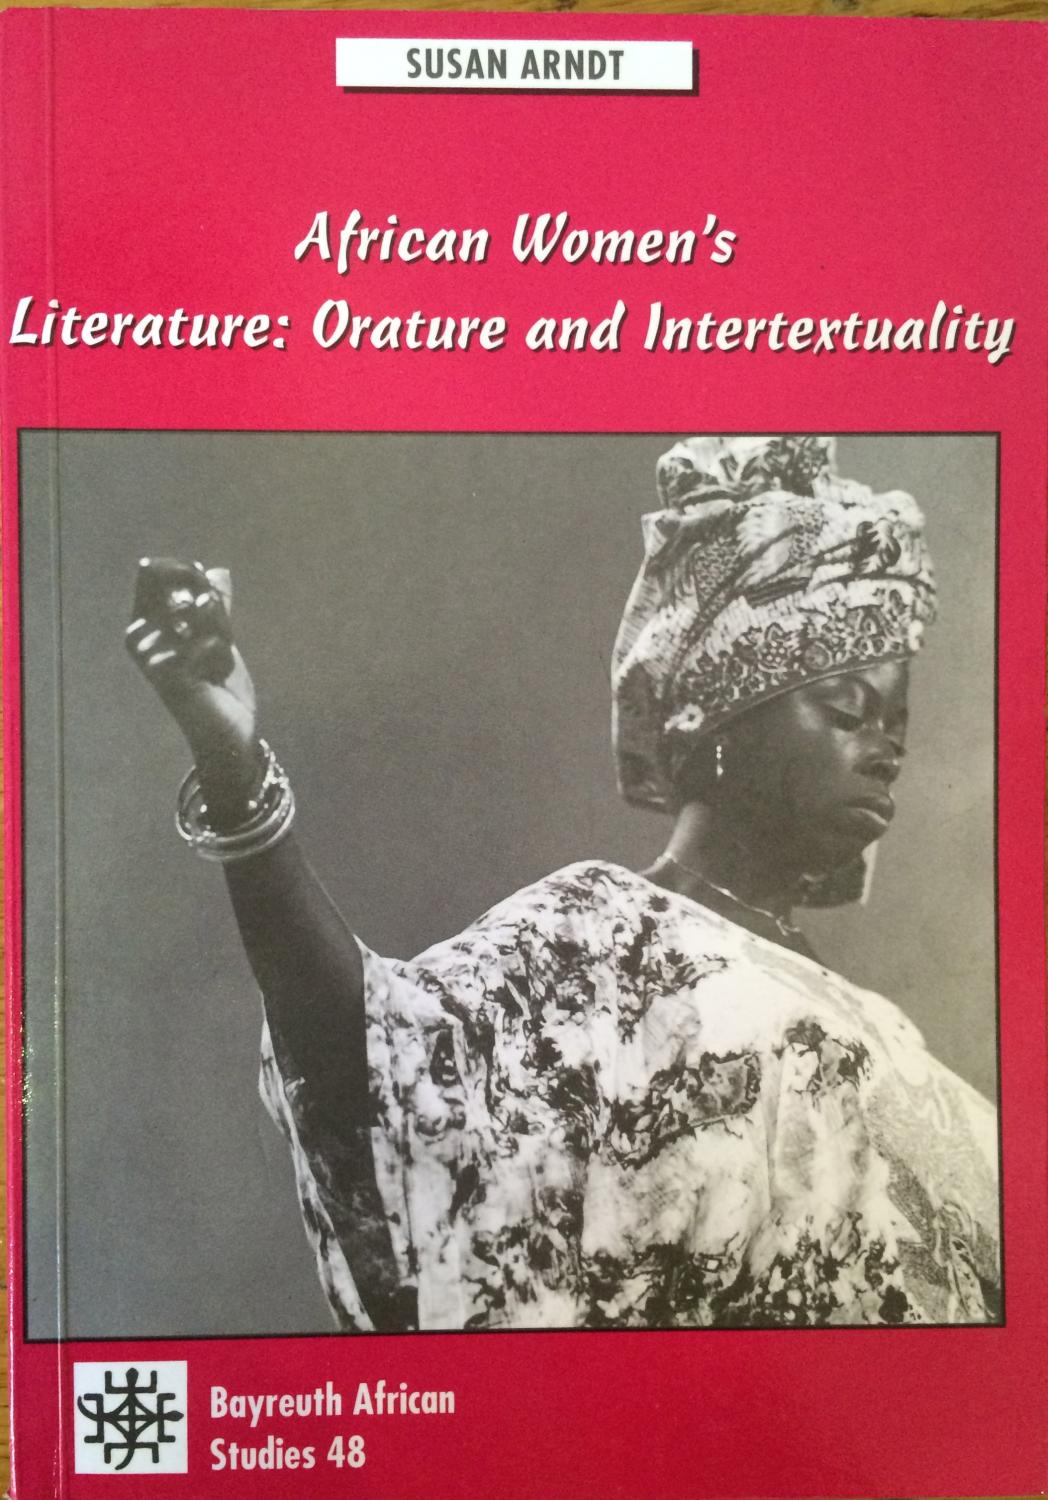 African Women's Literature: Orality and Intertextuality. Igbo Oral Narratives as models and objects for Writing Back